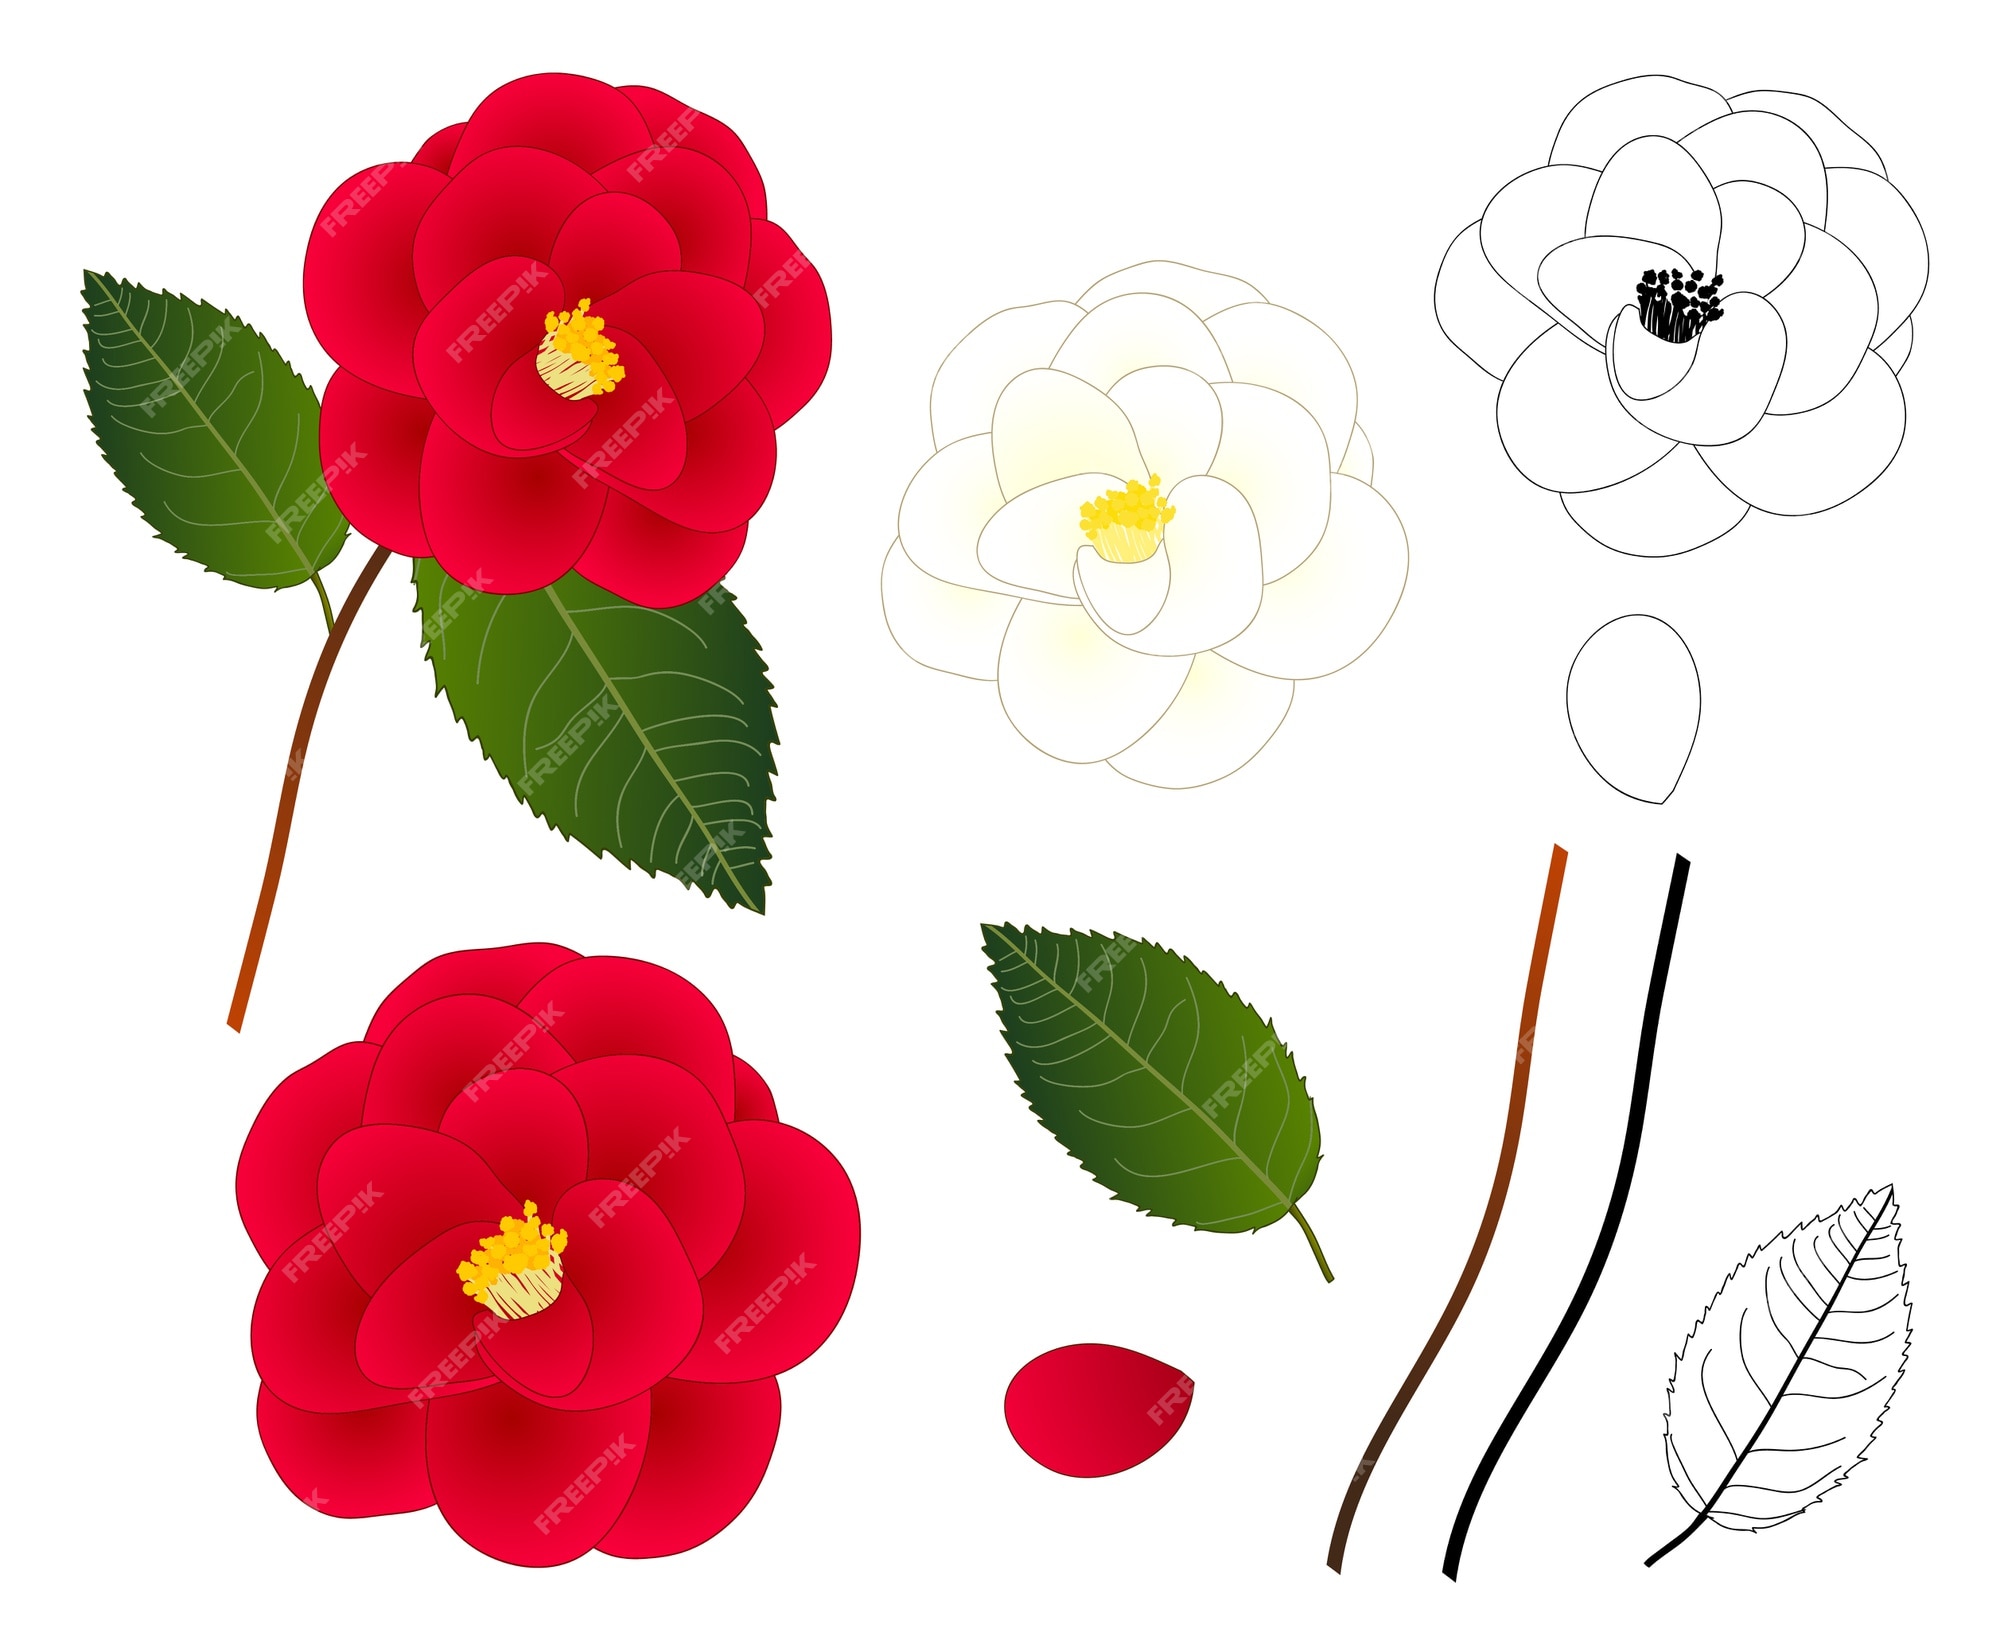 Page 4 | Camelia Images | Free Vectors, Stock Photos & PSD